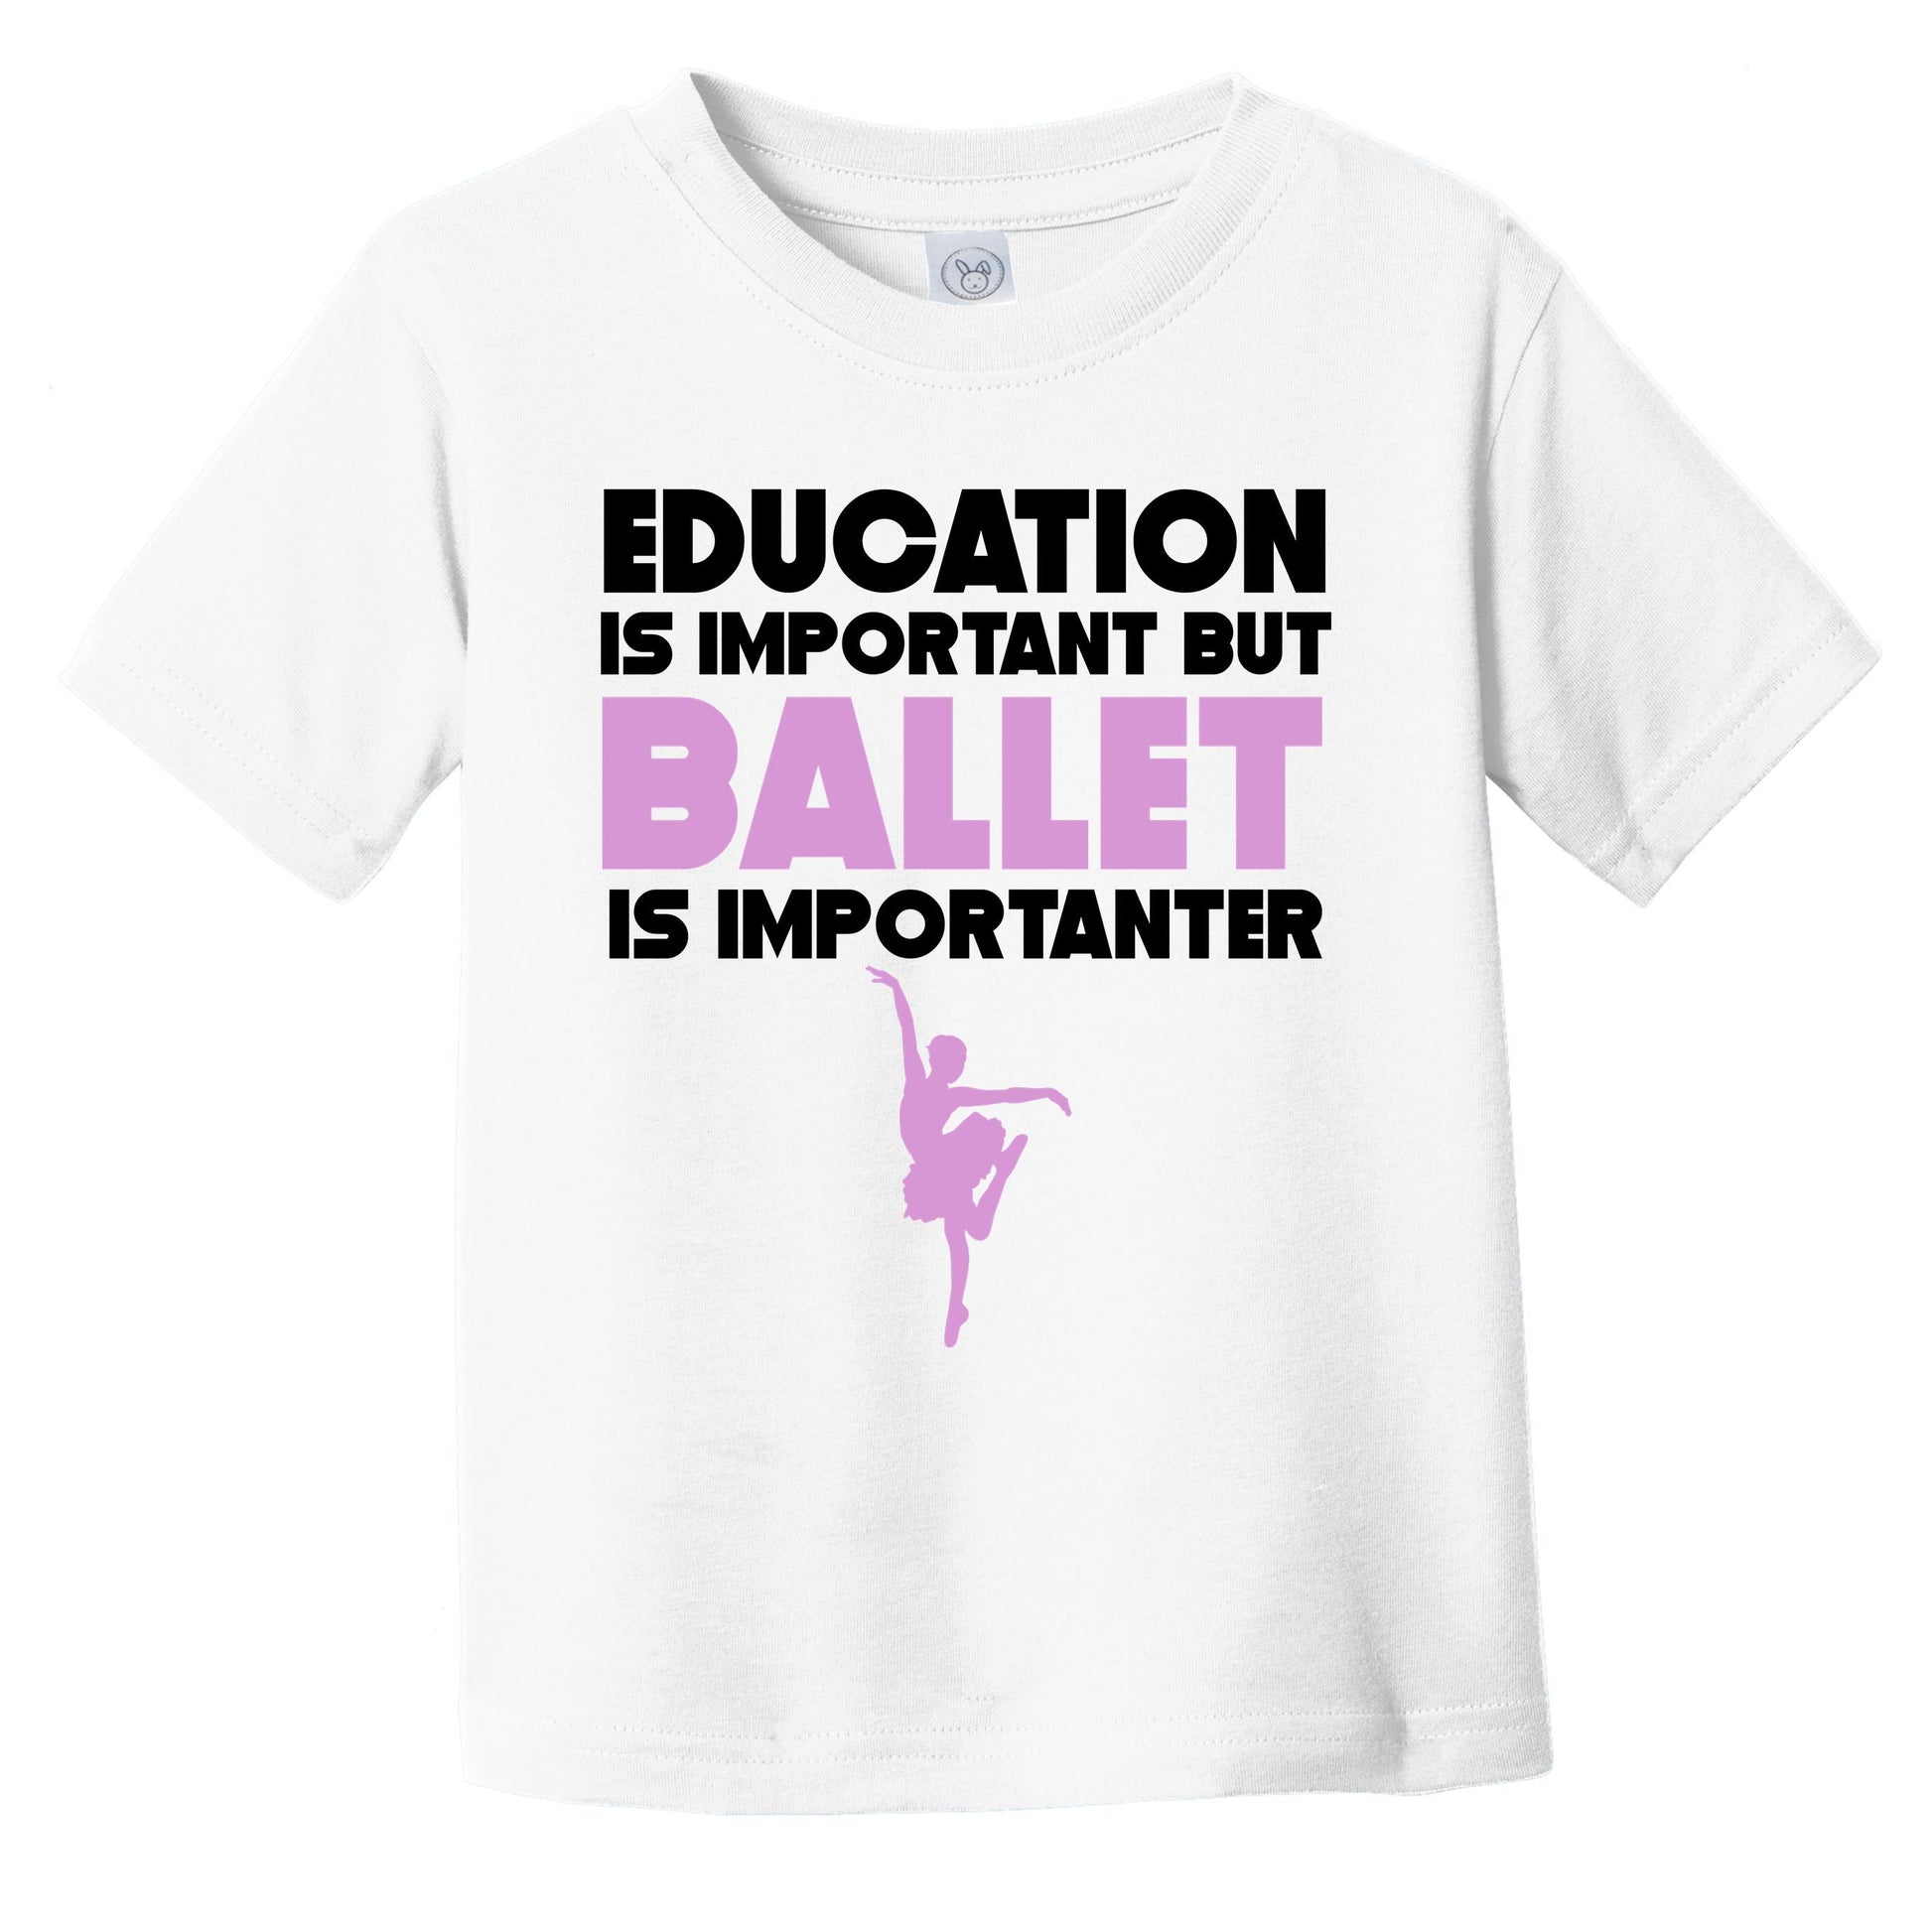 Education Is Important But Ballet Is Importanter Funny Infant Toddler T-Shirt